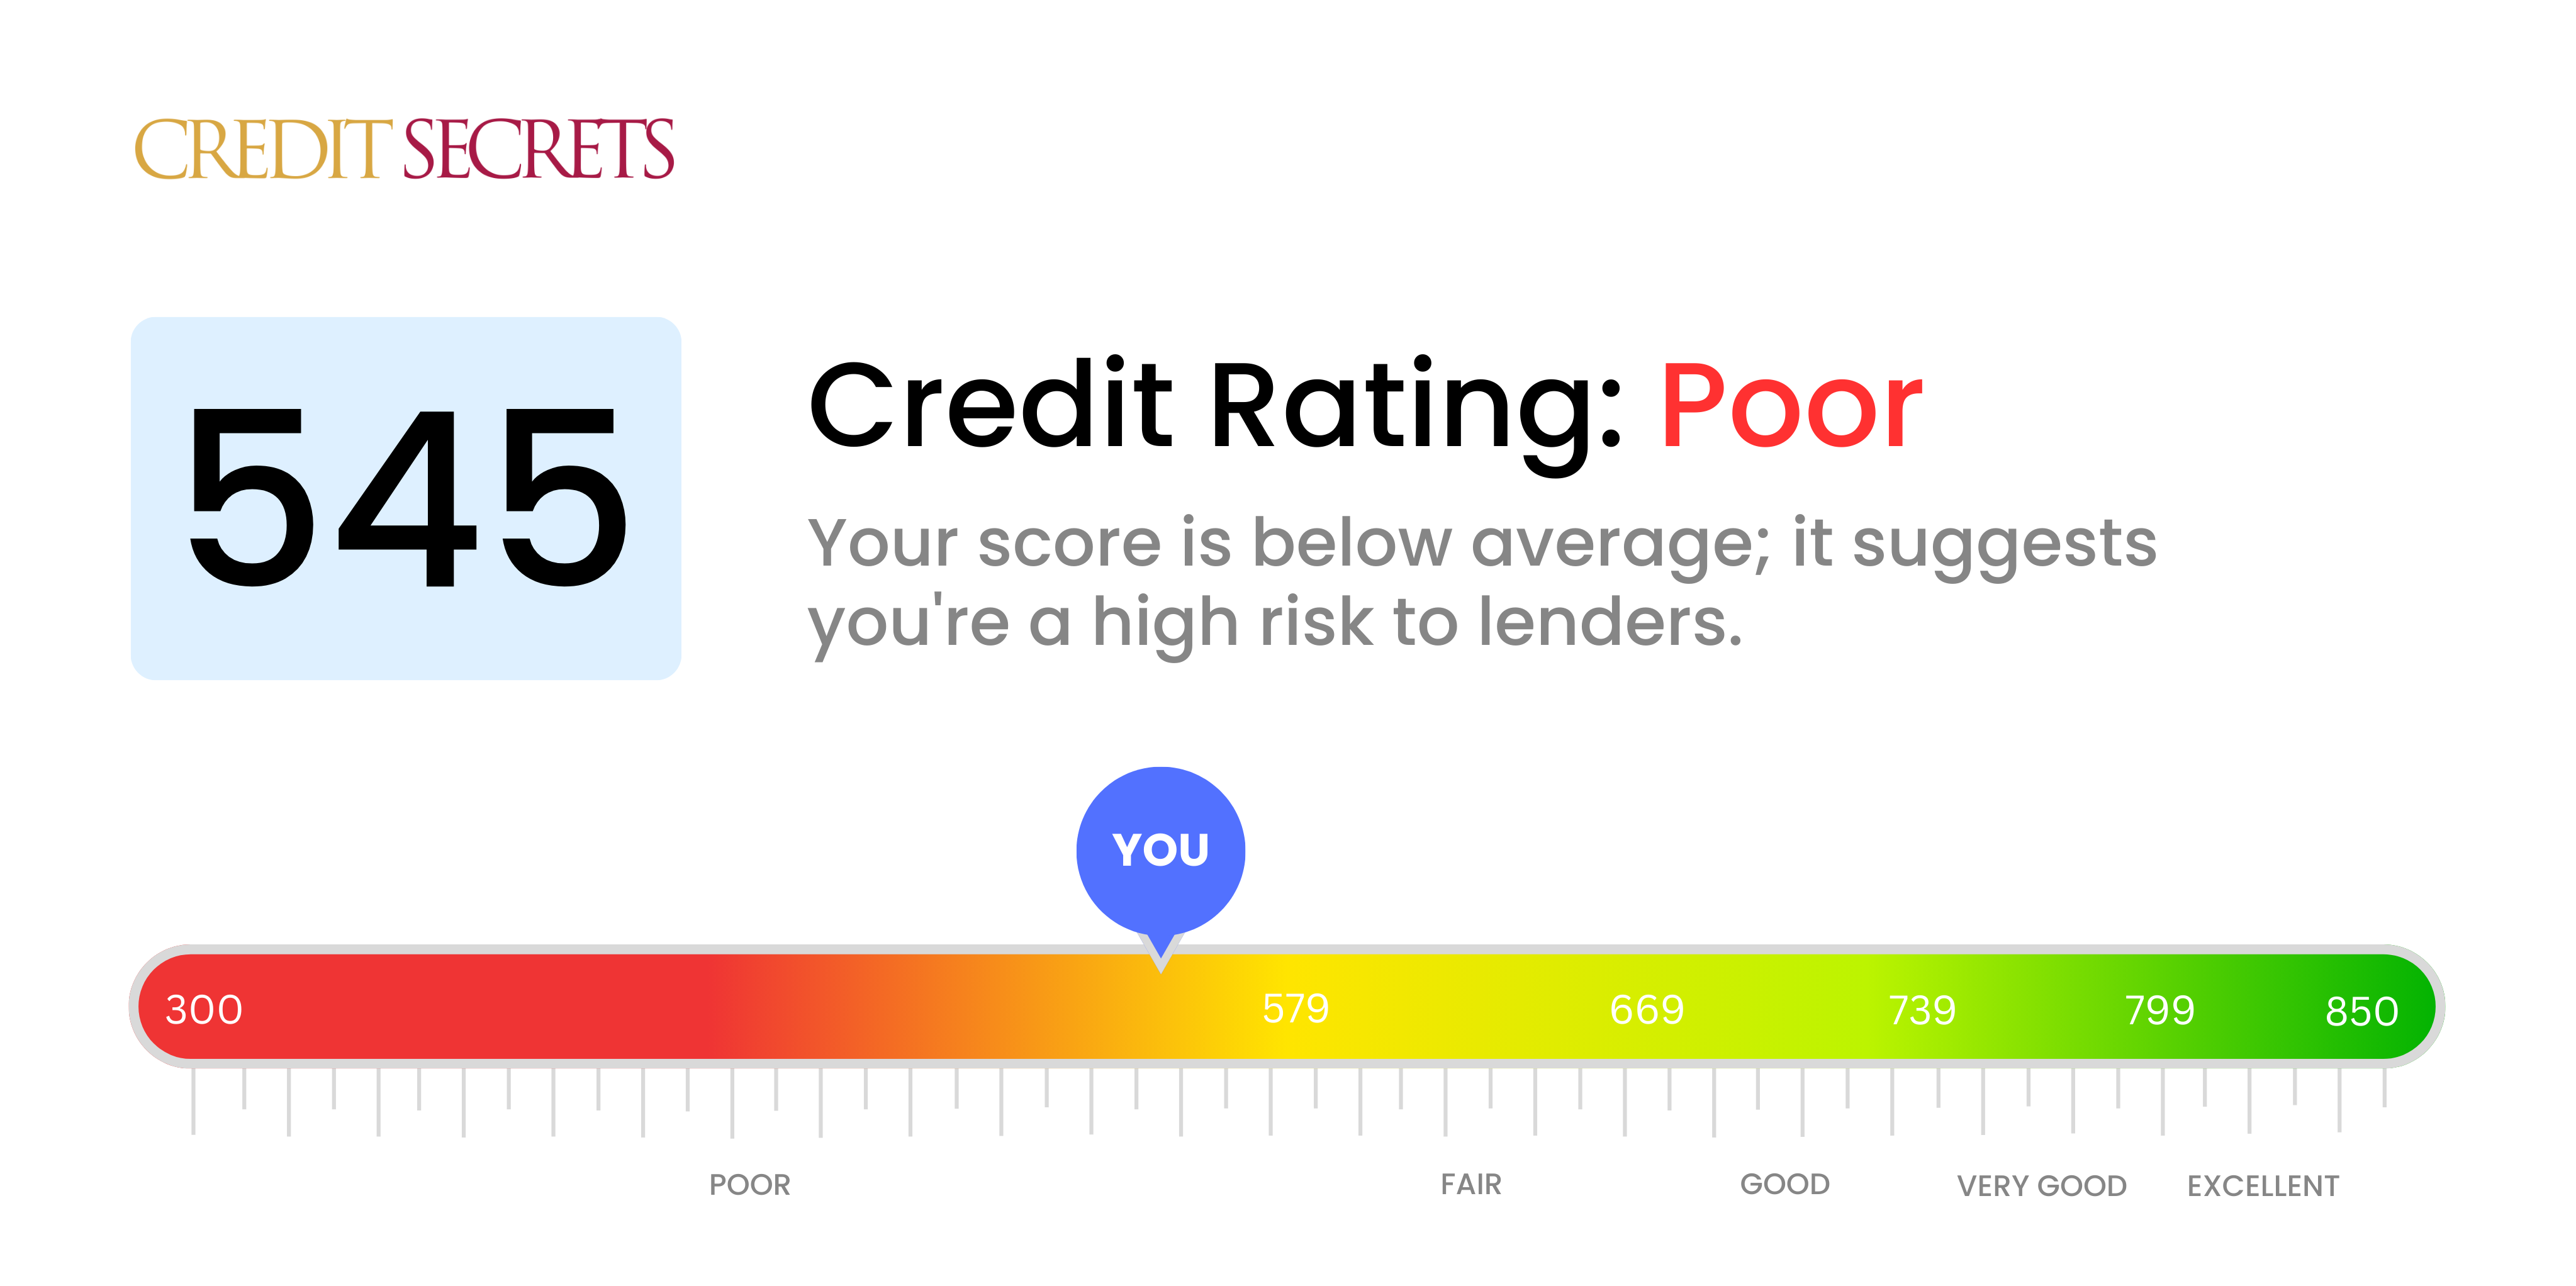 Is 545 a good credit score?